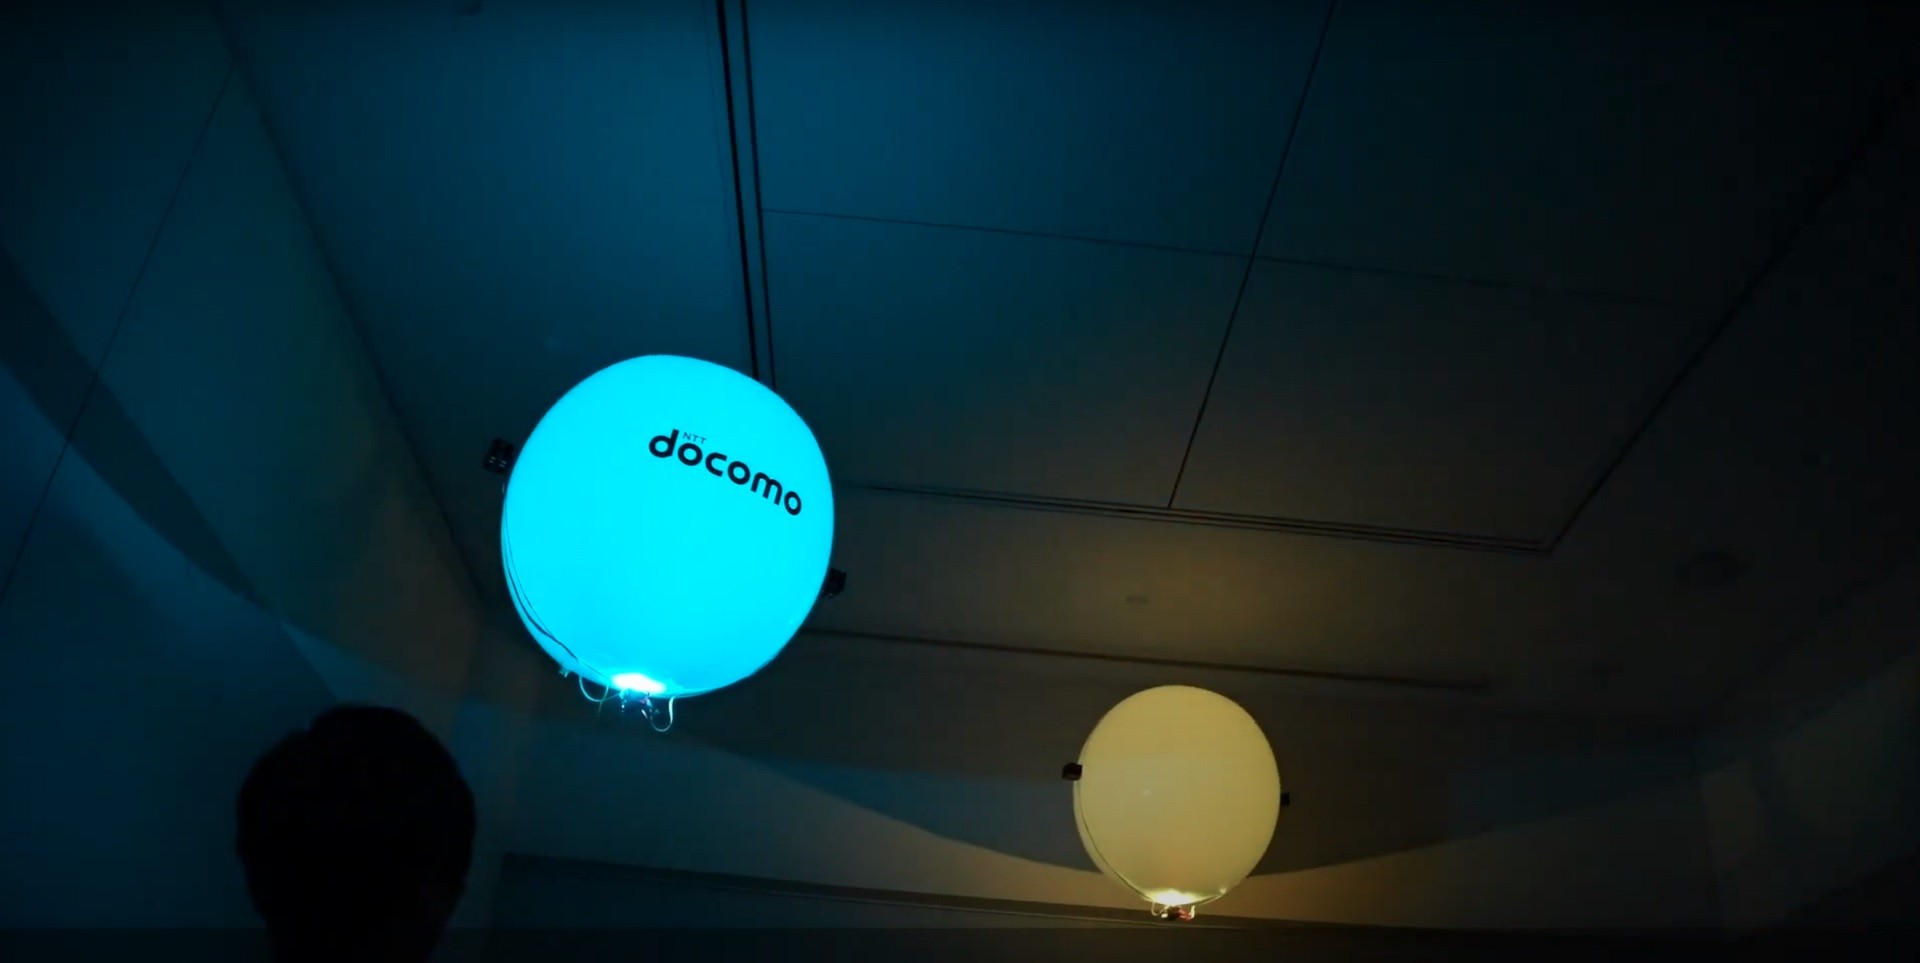 Japanese-Made Drone Is a Glowing Balloon Propelled by Ultrasonic Has - autoevolution